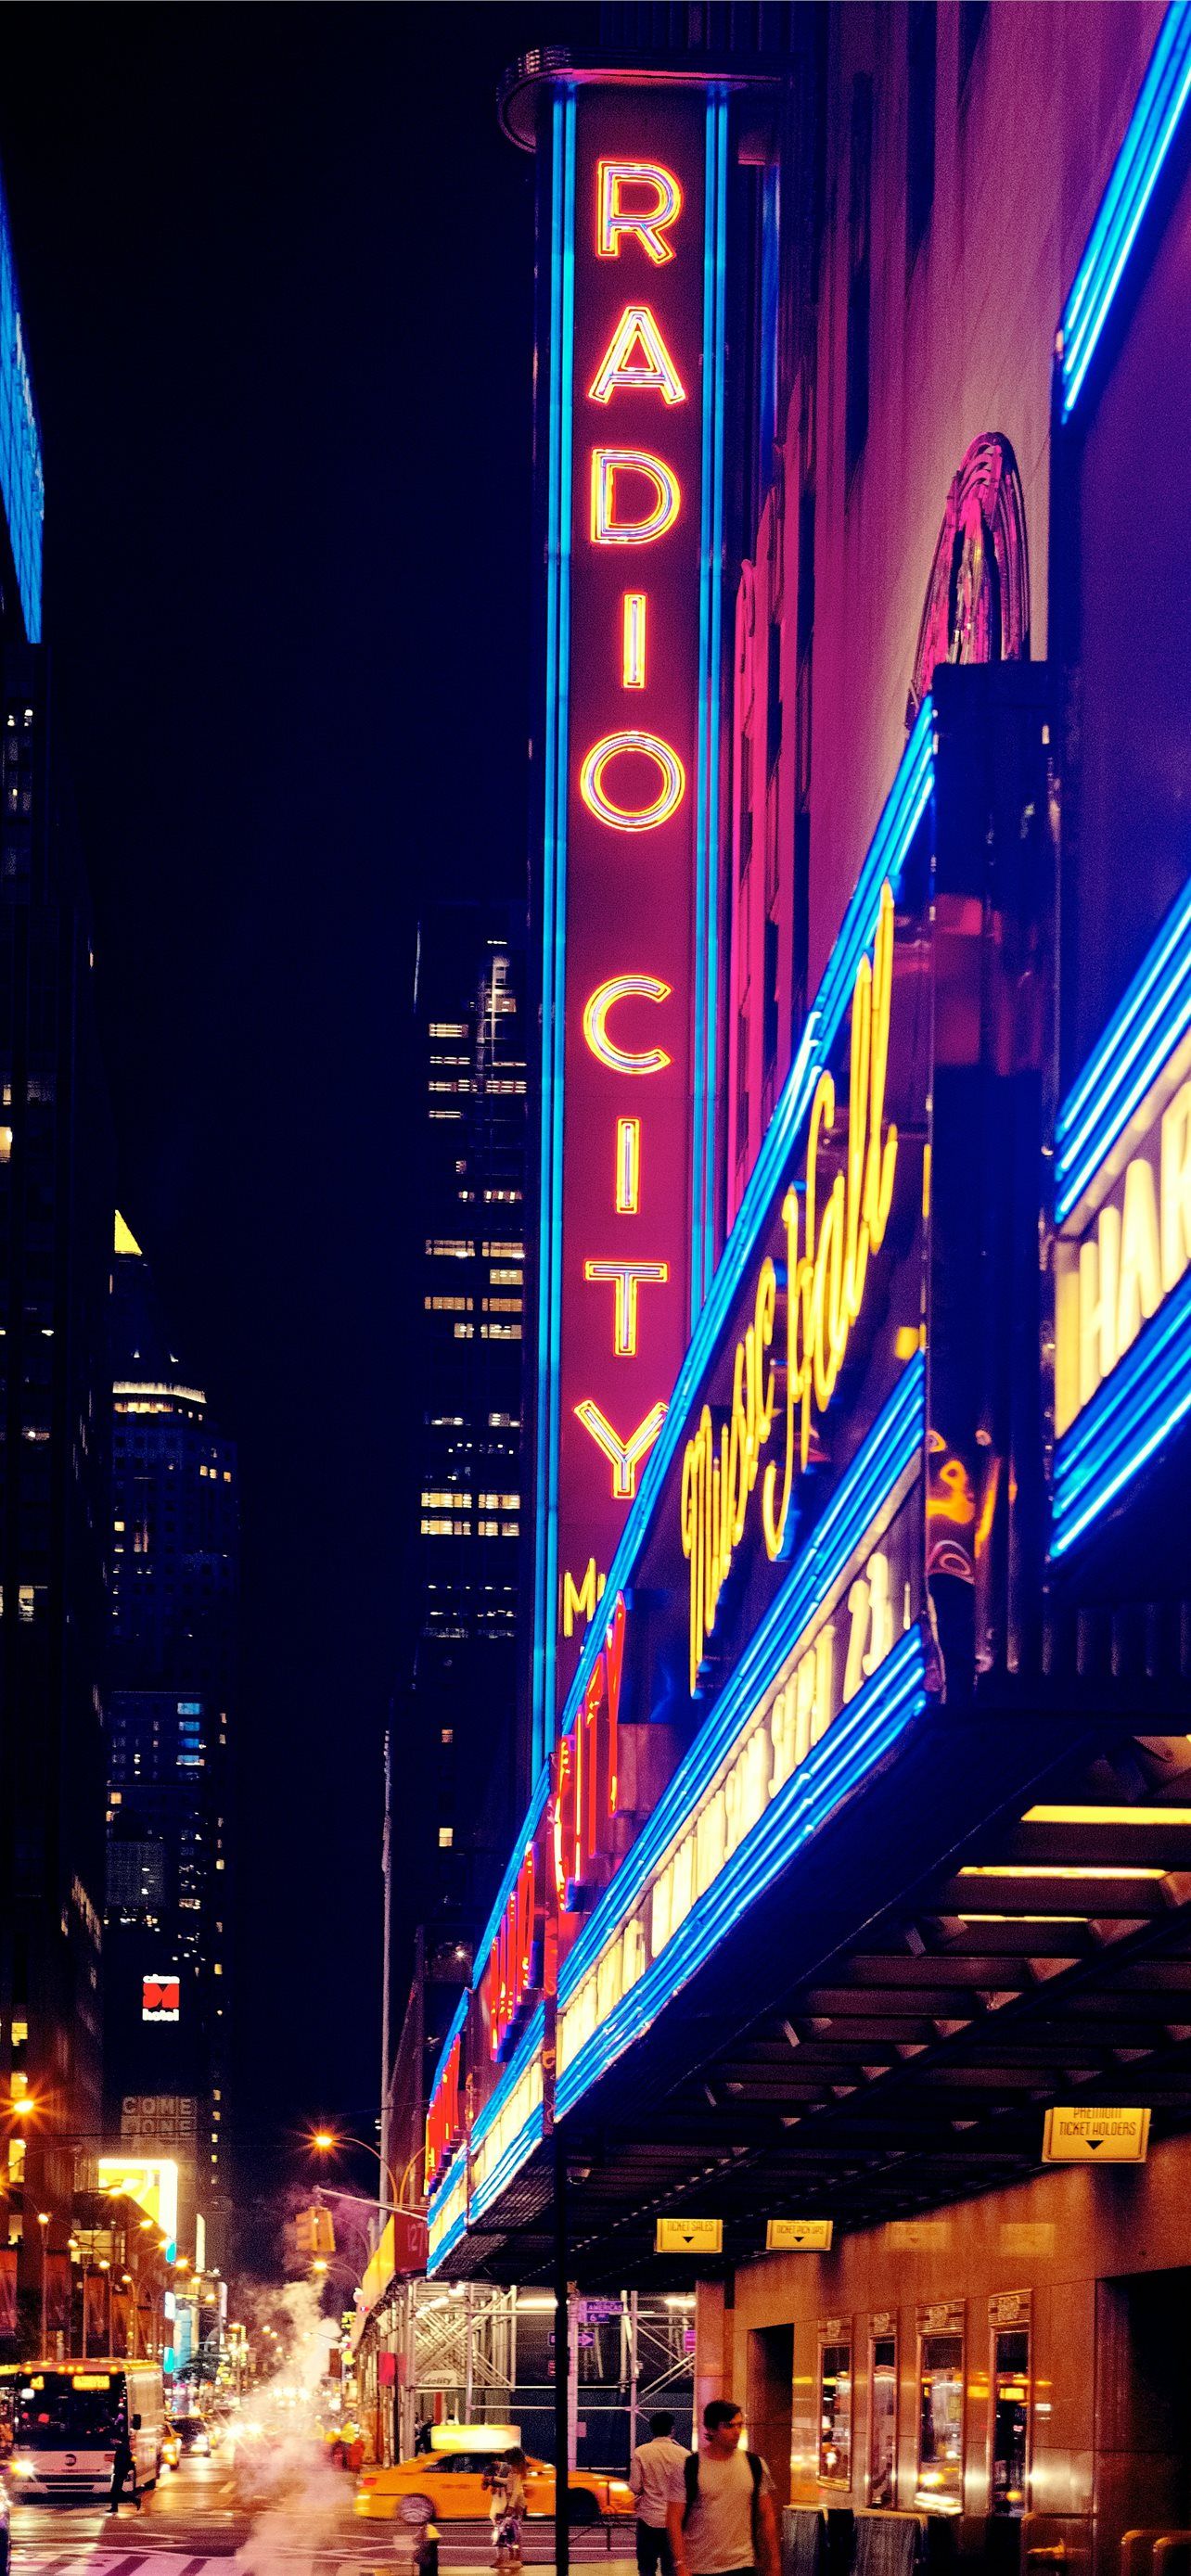 inlighted Radio City signage iPhone Wallpaper Free Download